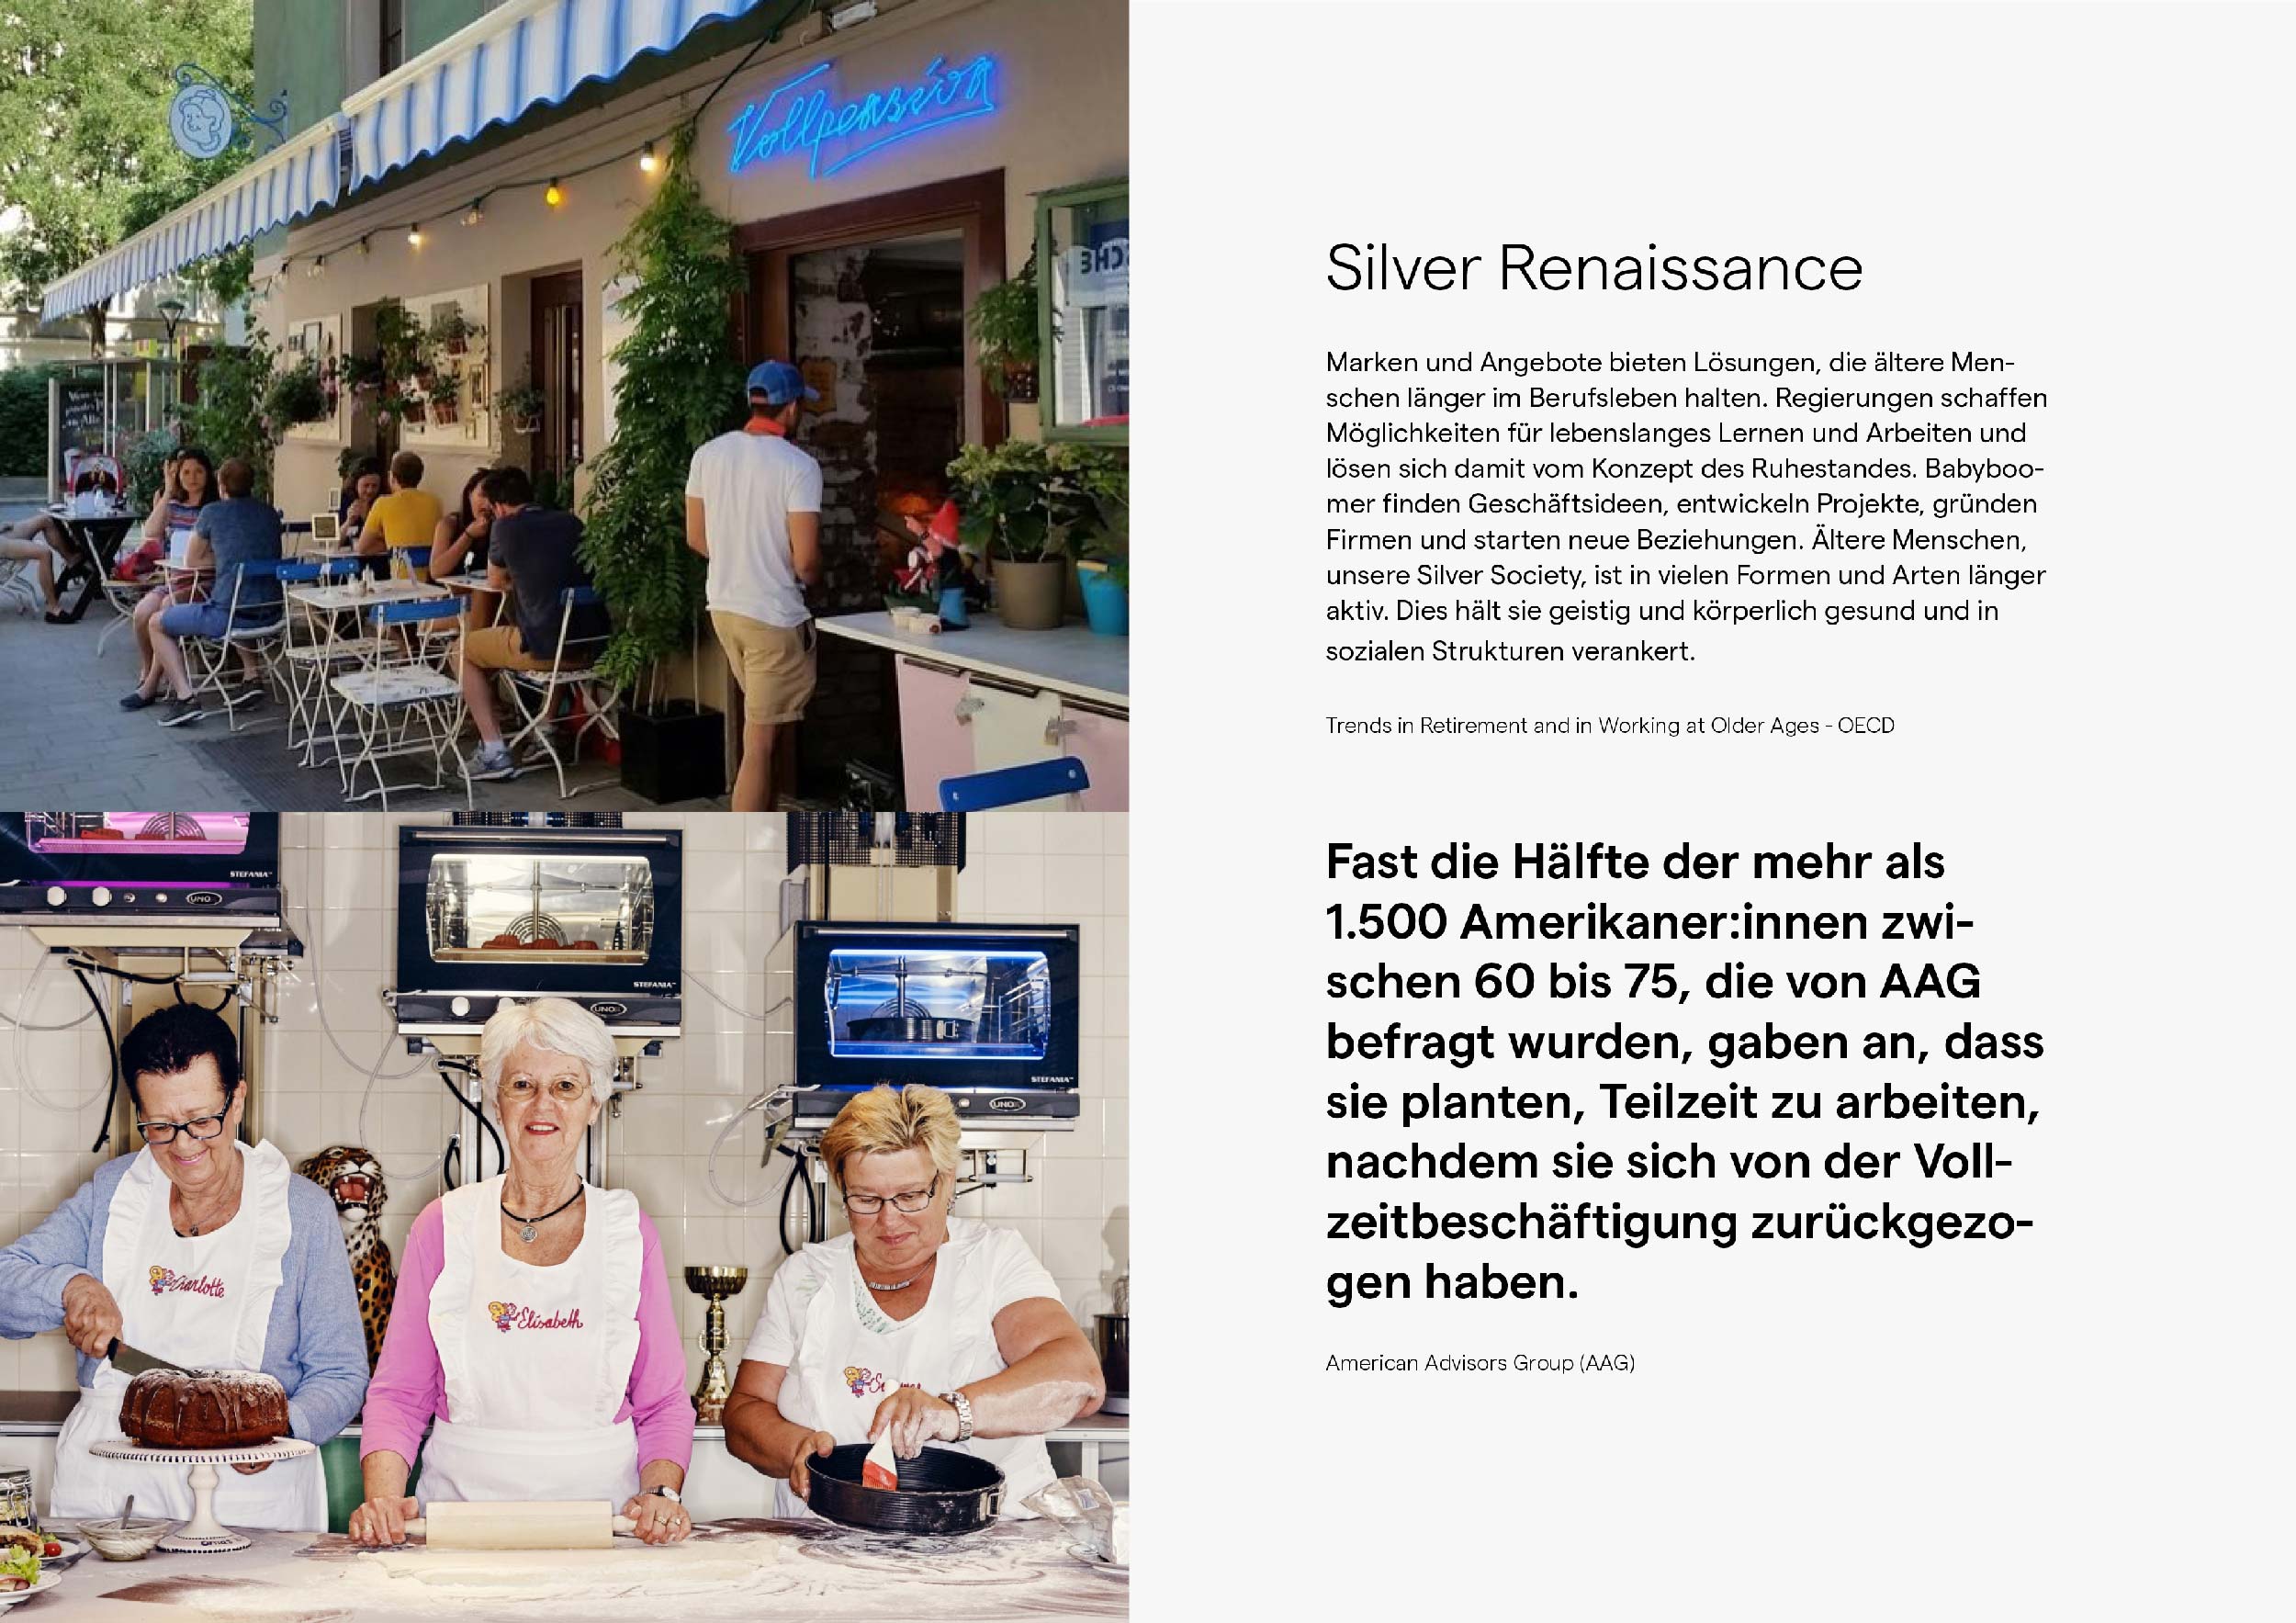 Silver Renaissance: Brands and offerings offer solutions that keep older people in the workforce longer.